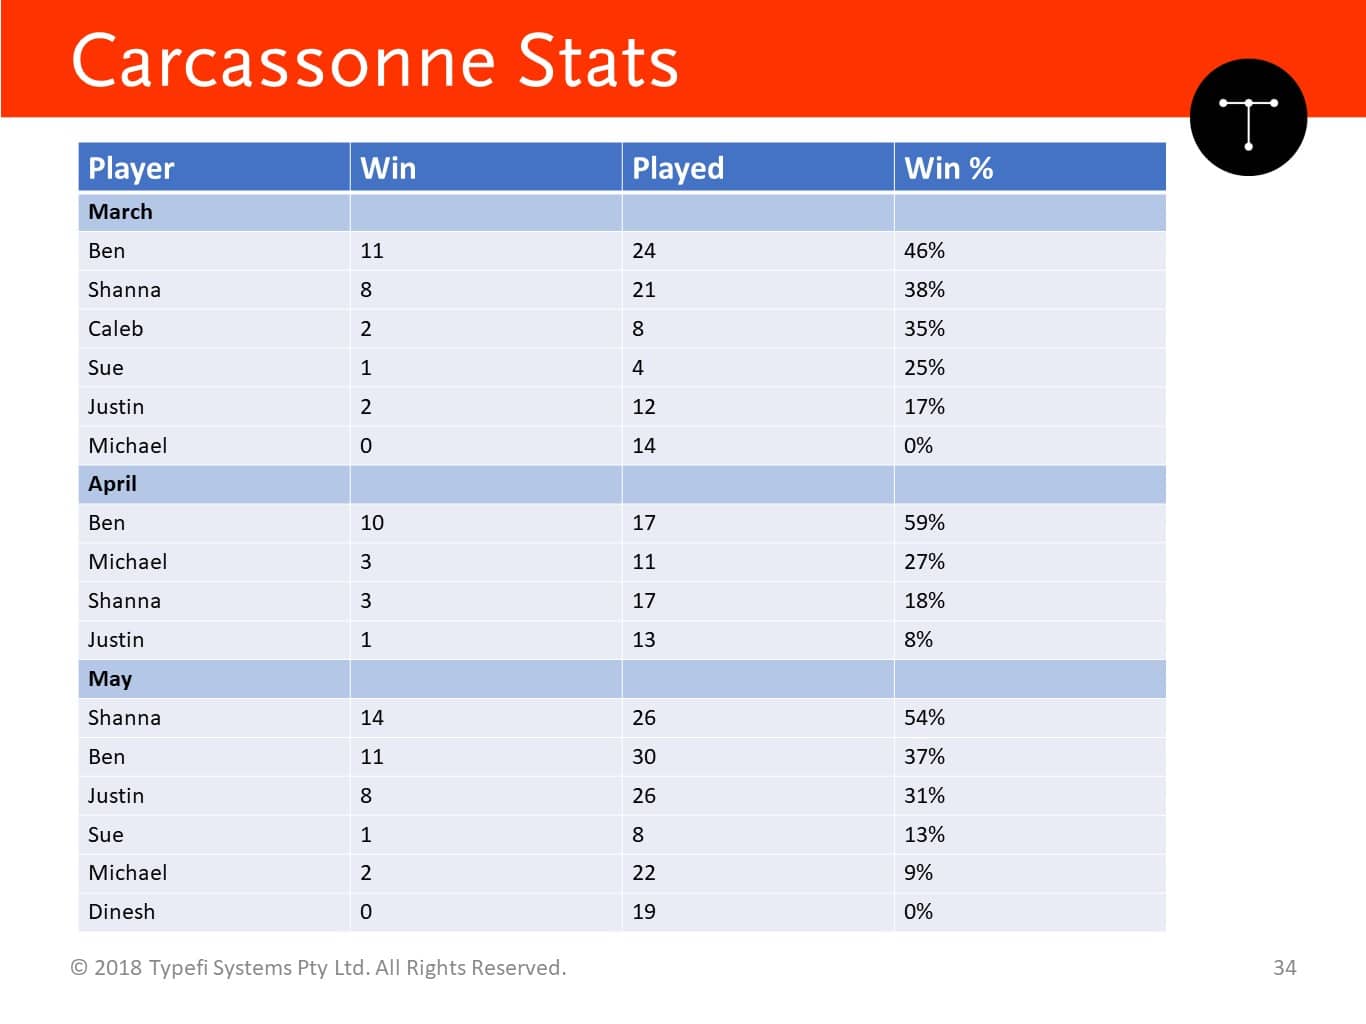 A Carcassonne Statistics table showing Month, Player, Win, Played, and Win percentage. Months are presented as sub-headings spanning the width of the table.